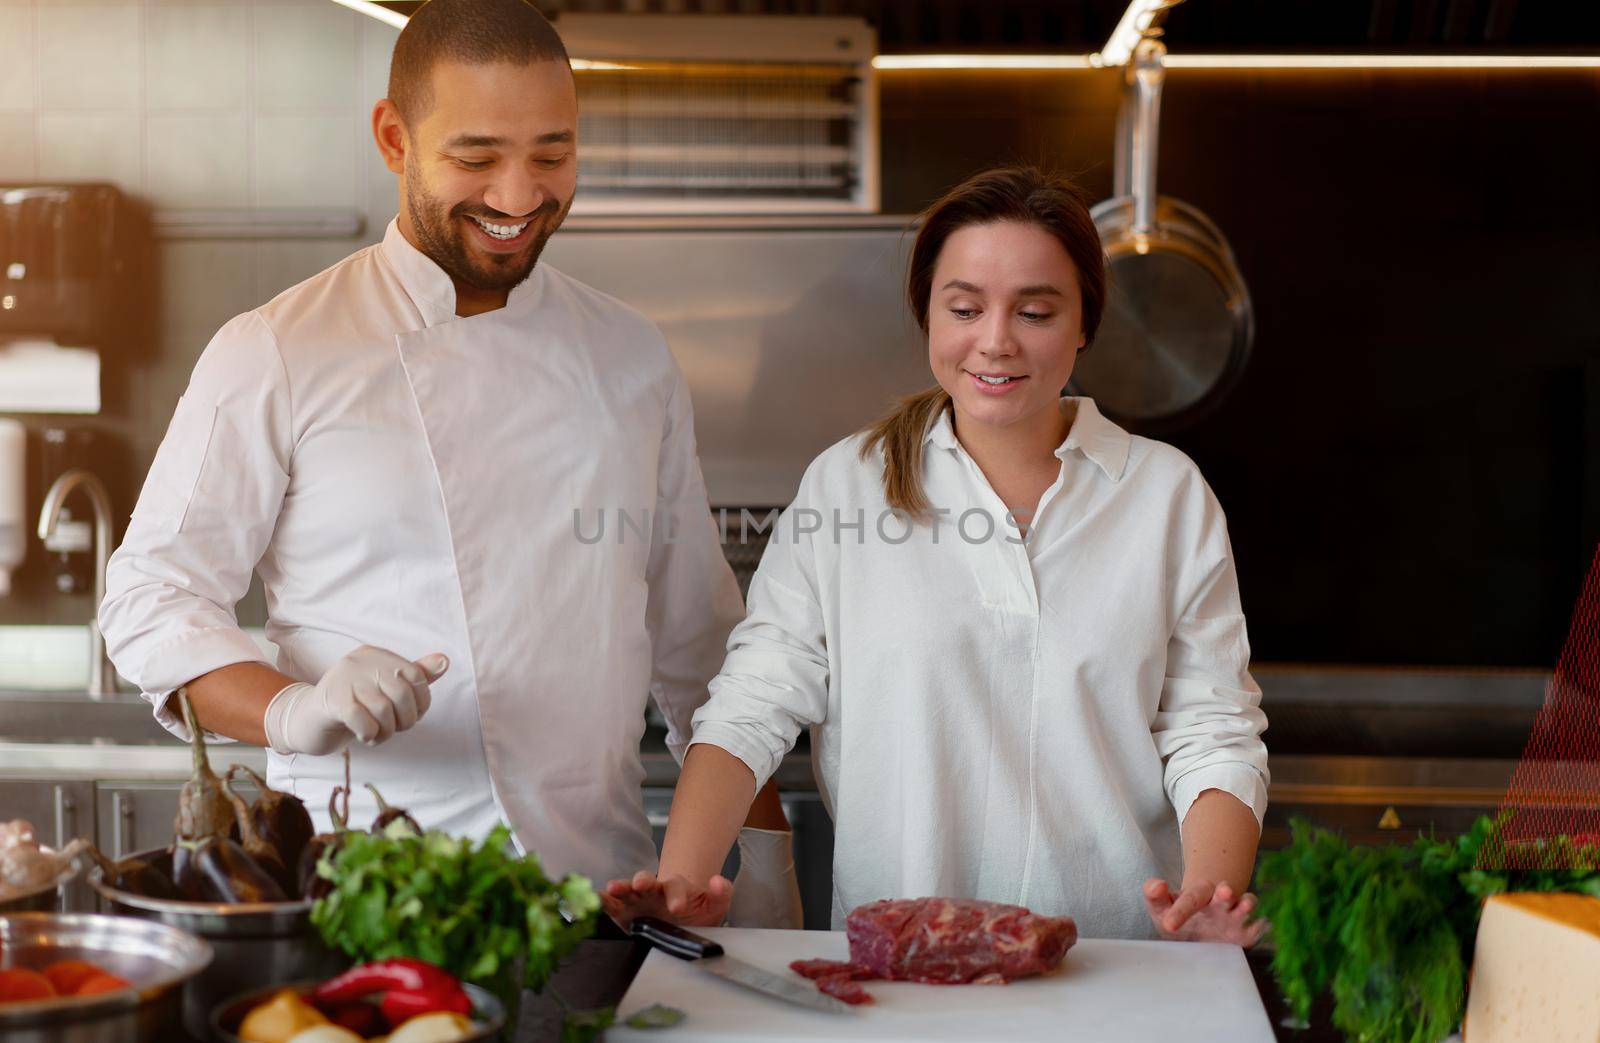 Handsome young African chef is cooking together with Caucasian girlfriend in the kitchen A cook teaches a girl how to cook. Man and woman cooking in professional kitchen. interracial relationship